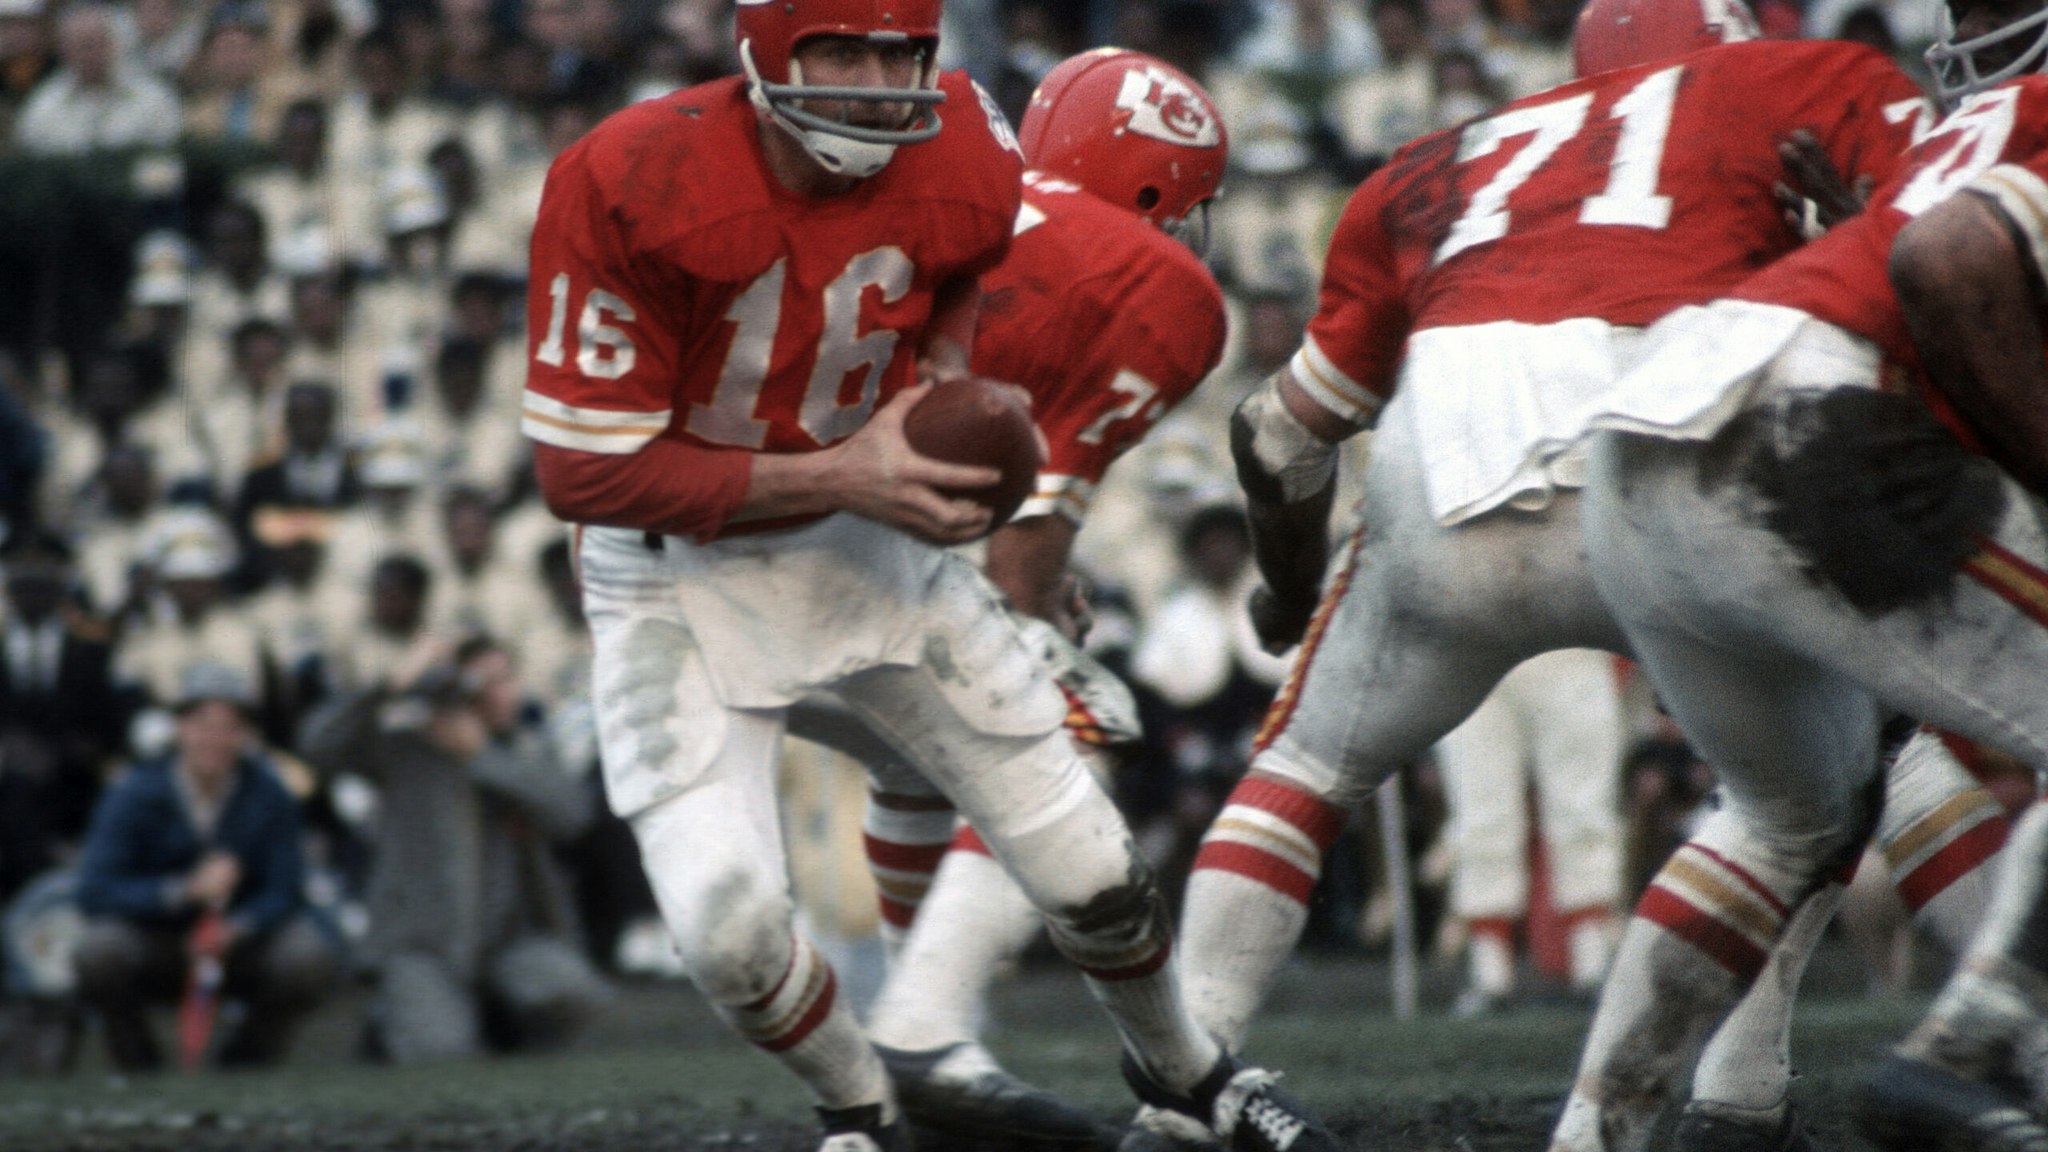 Len Dawson, the great Kansas City Chiefs quarterback who led the team to a Super Bowl win in 1970, has died.